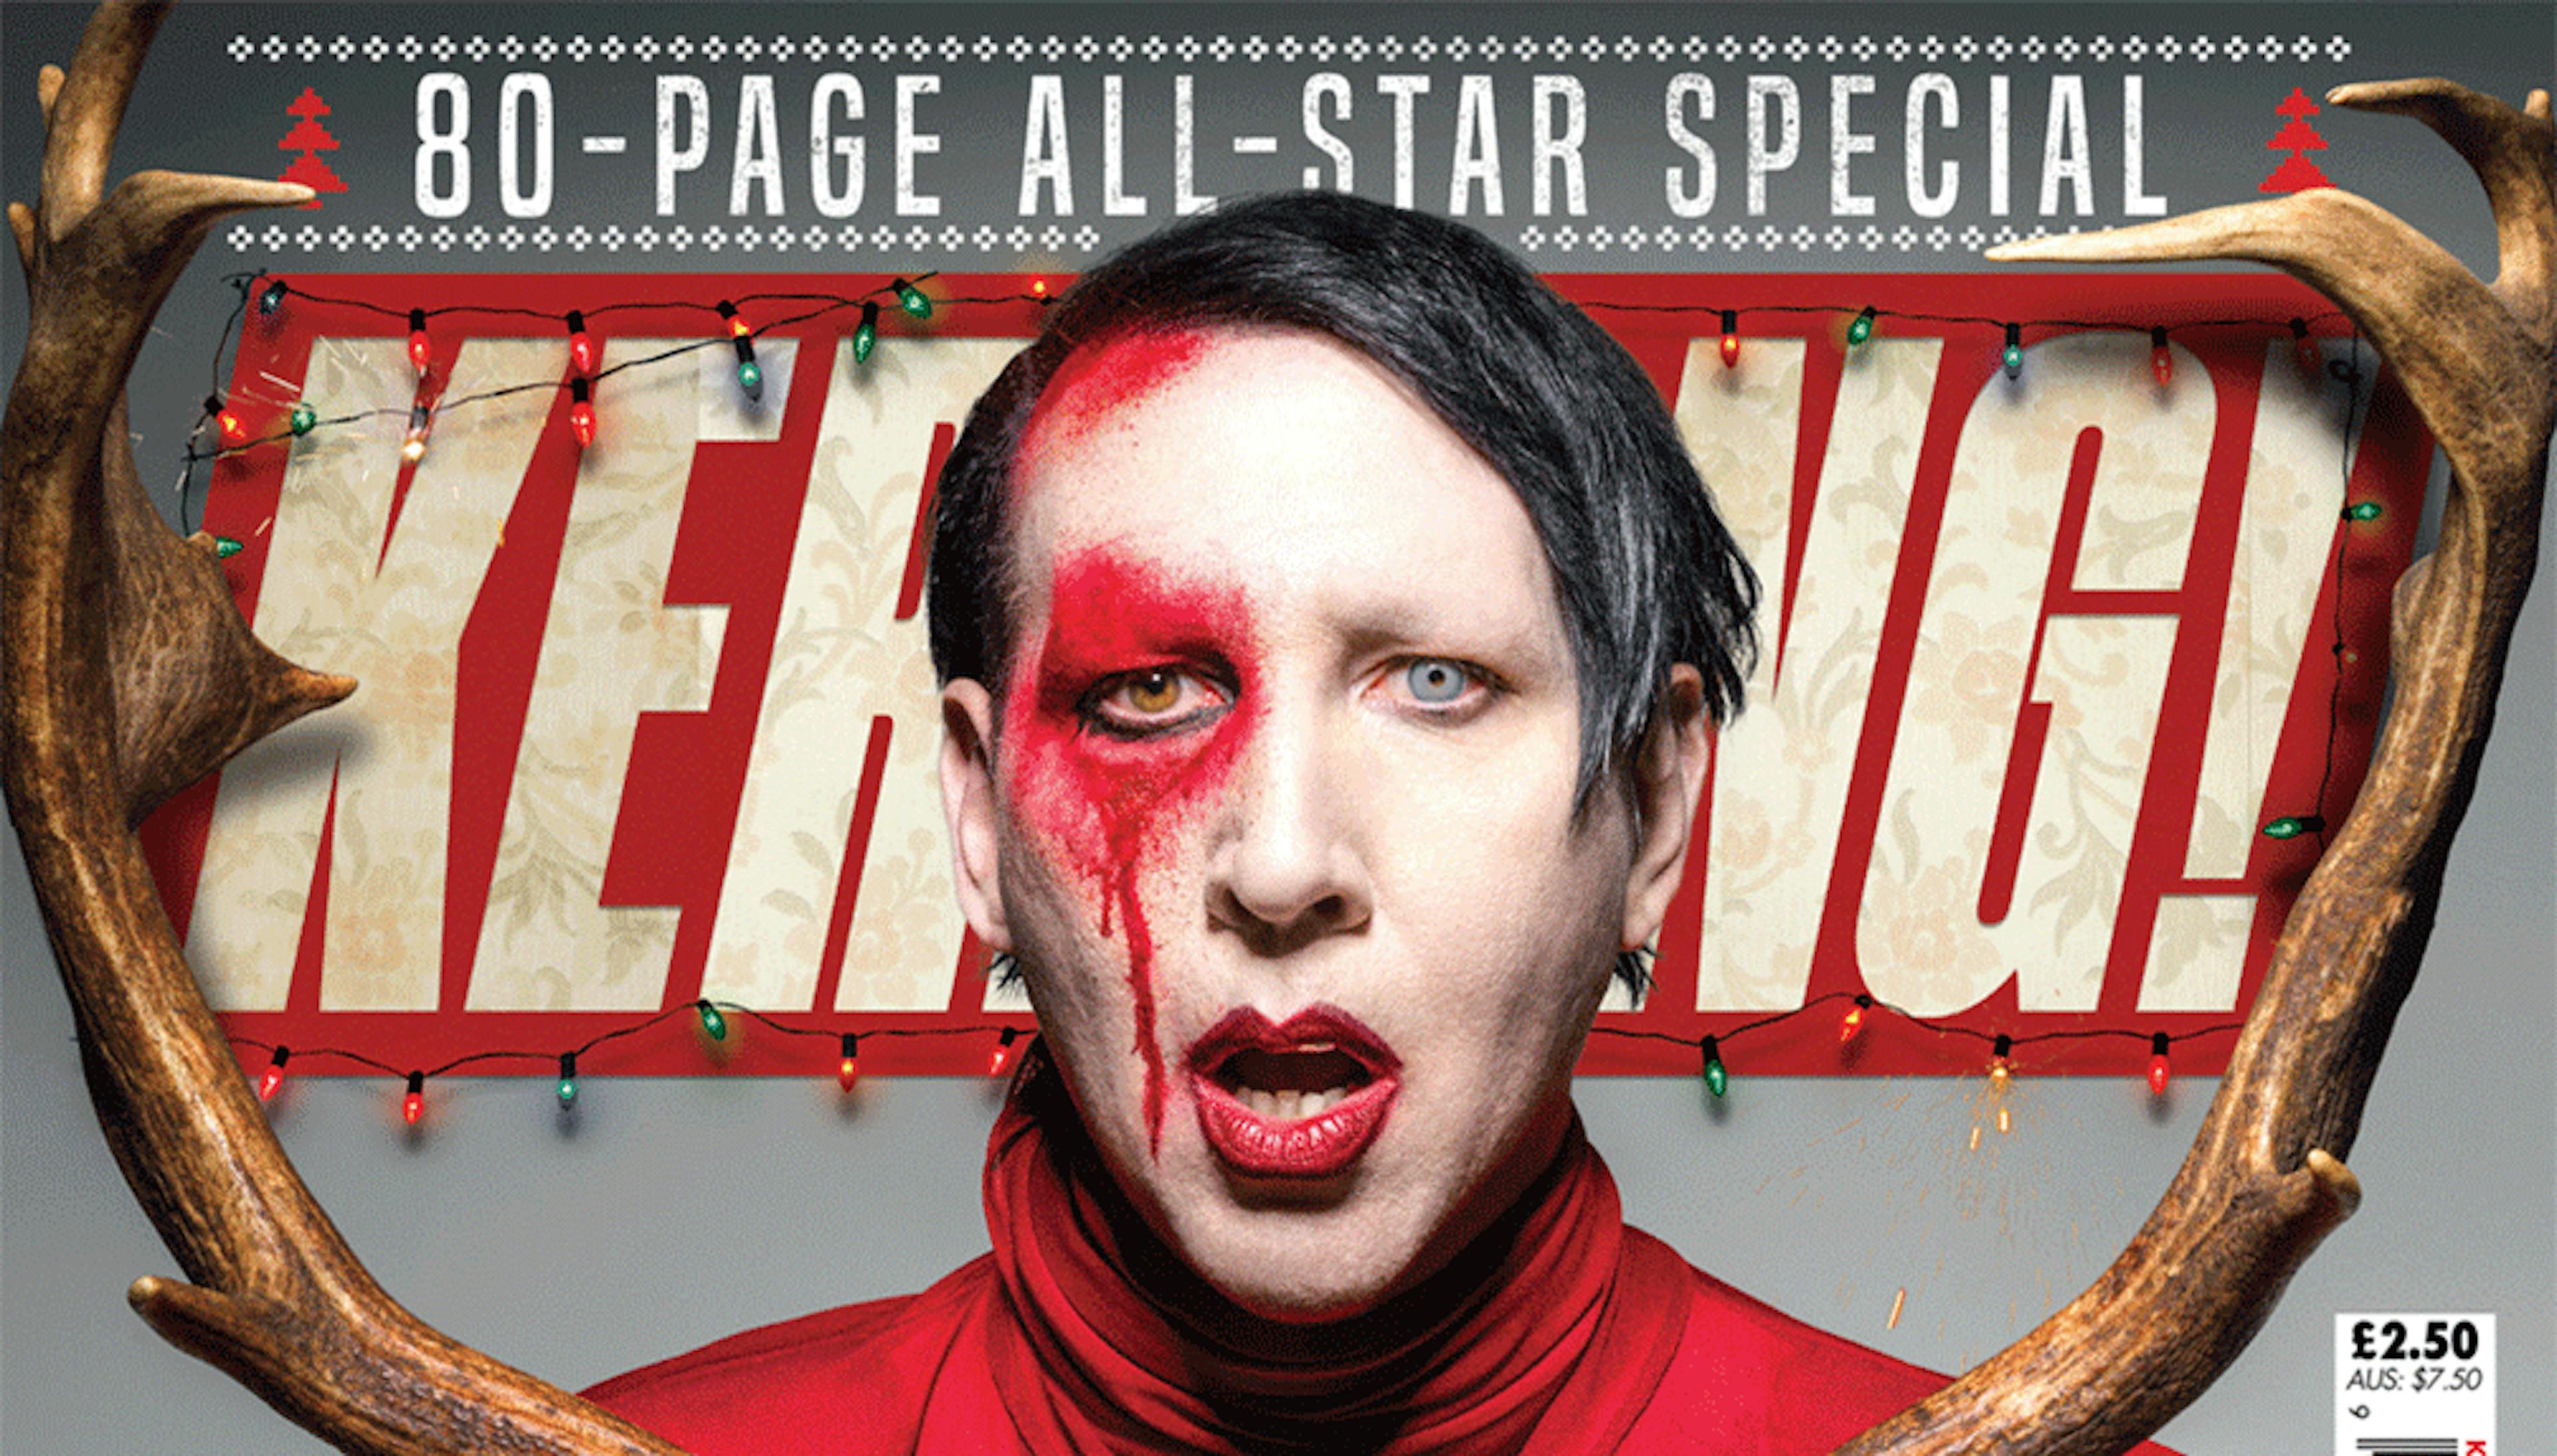 K!1702: Marilyn Manson – In Bed With The Antichristmas Superstar